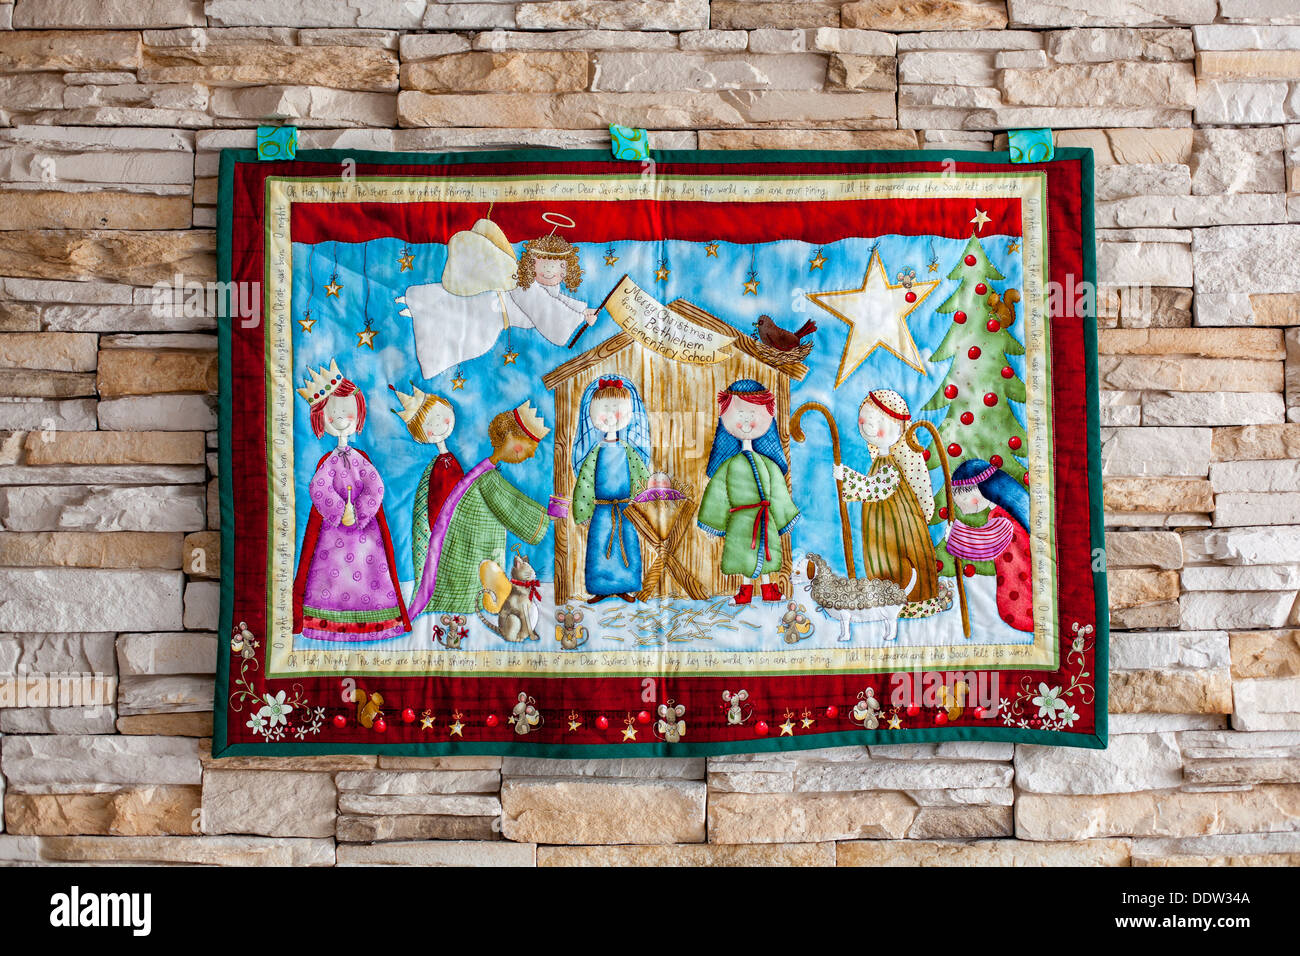 Colored Christmas tapestry hanging from a stone wall Stock Photo